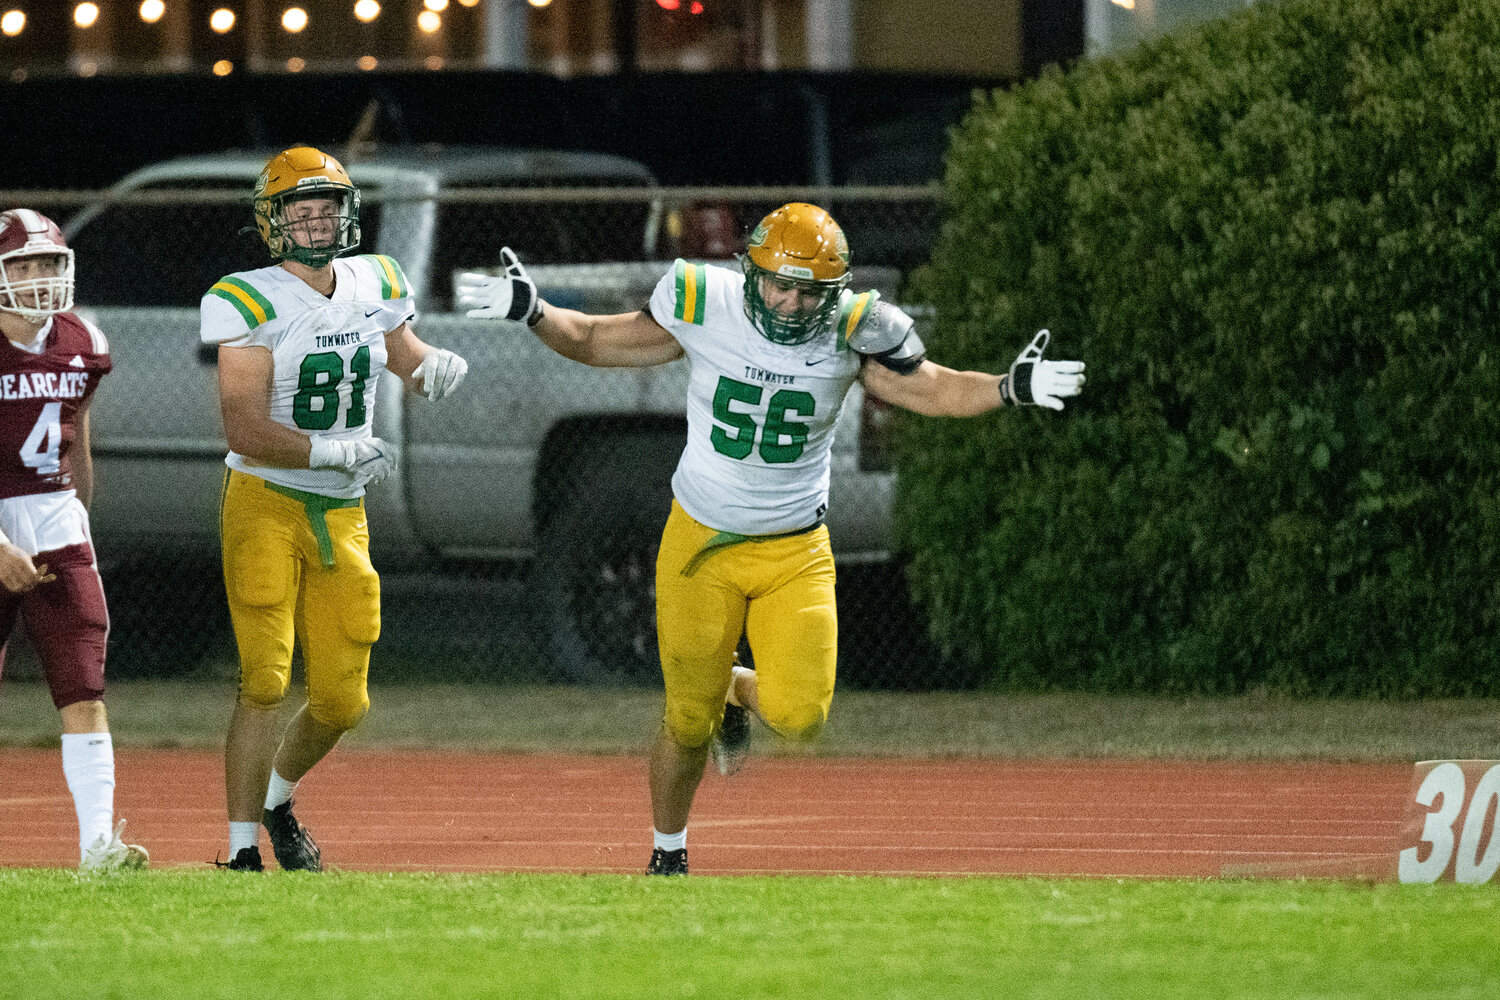 Alexander Hach celebrates a blocked punt in the first half of Tumwater's 55-20 win over W.F. West on Sept. 29.